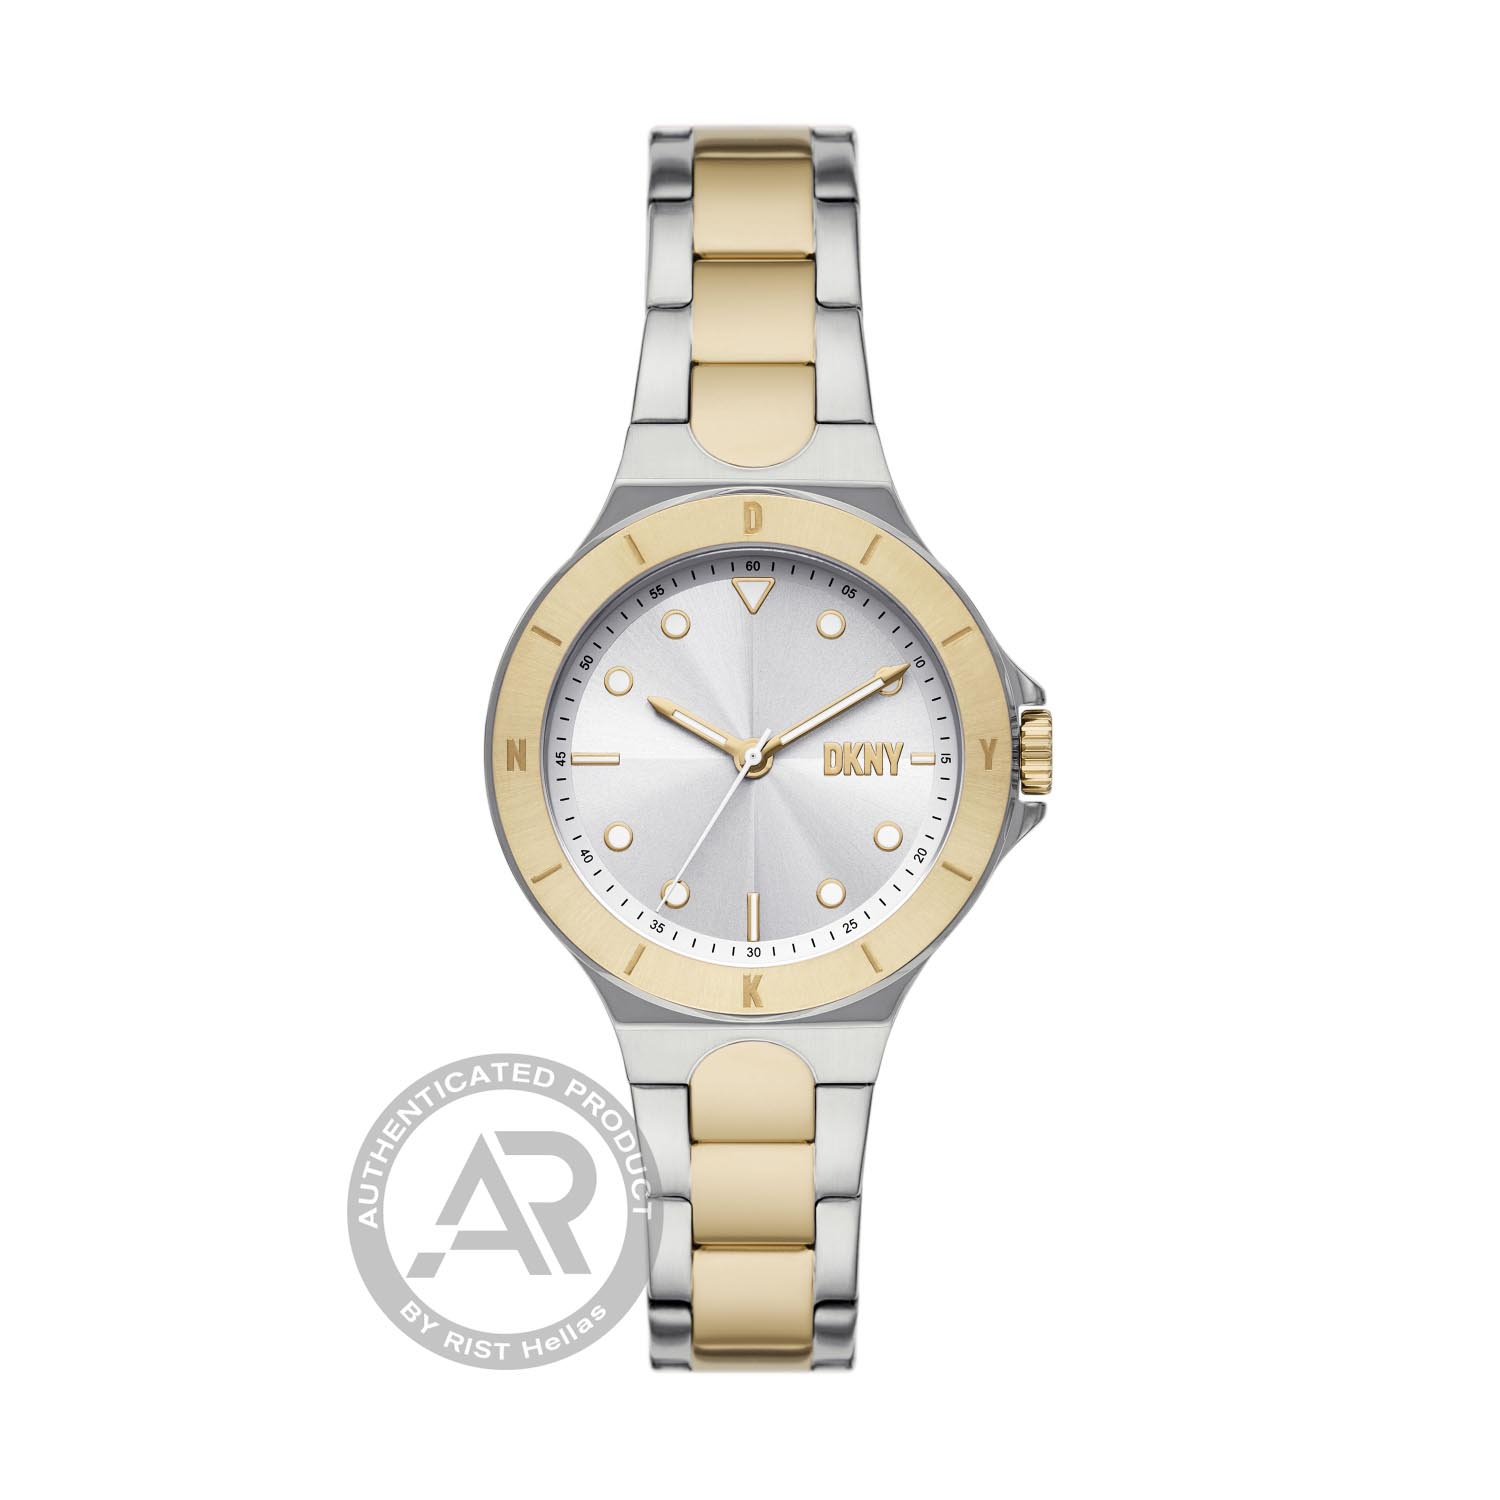 DKNY womens bicolour stainless steel watch with white dial and bracelet.